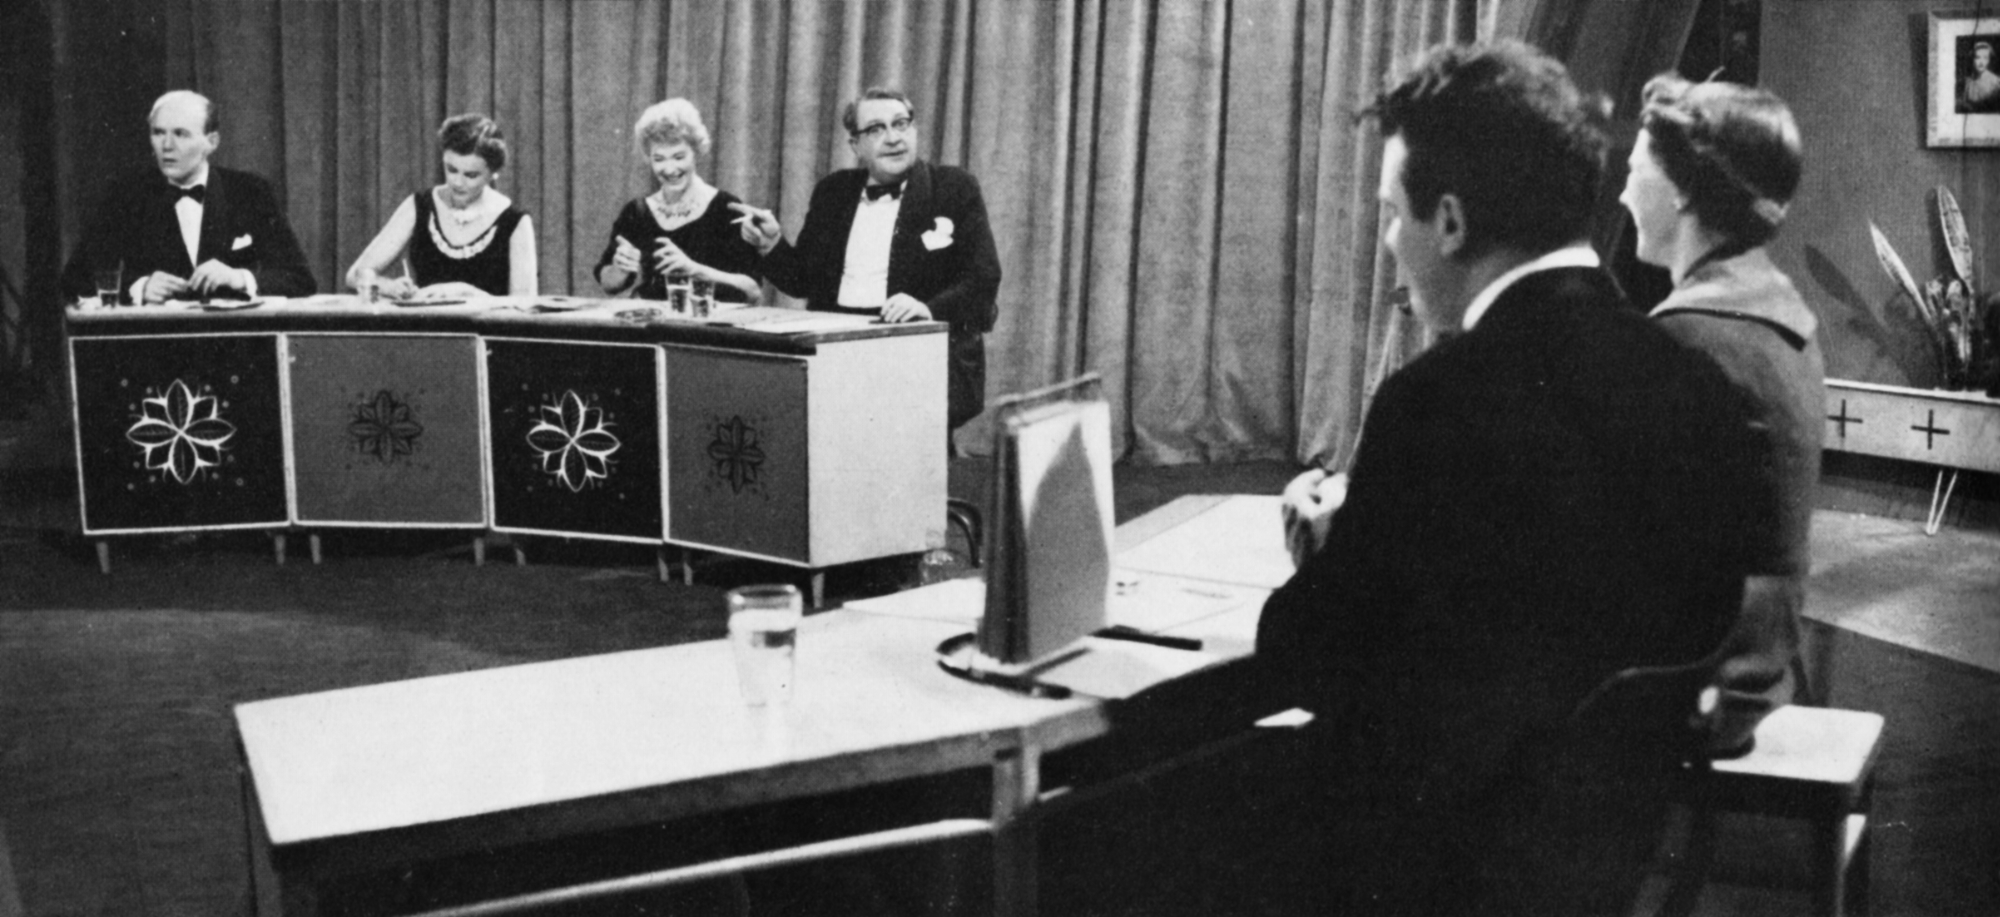 The What's My Line panel, Eamonn Andrews and the contestant sit behind desks